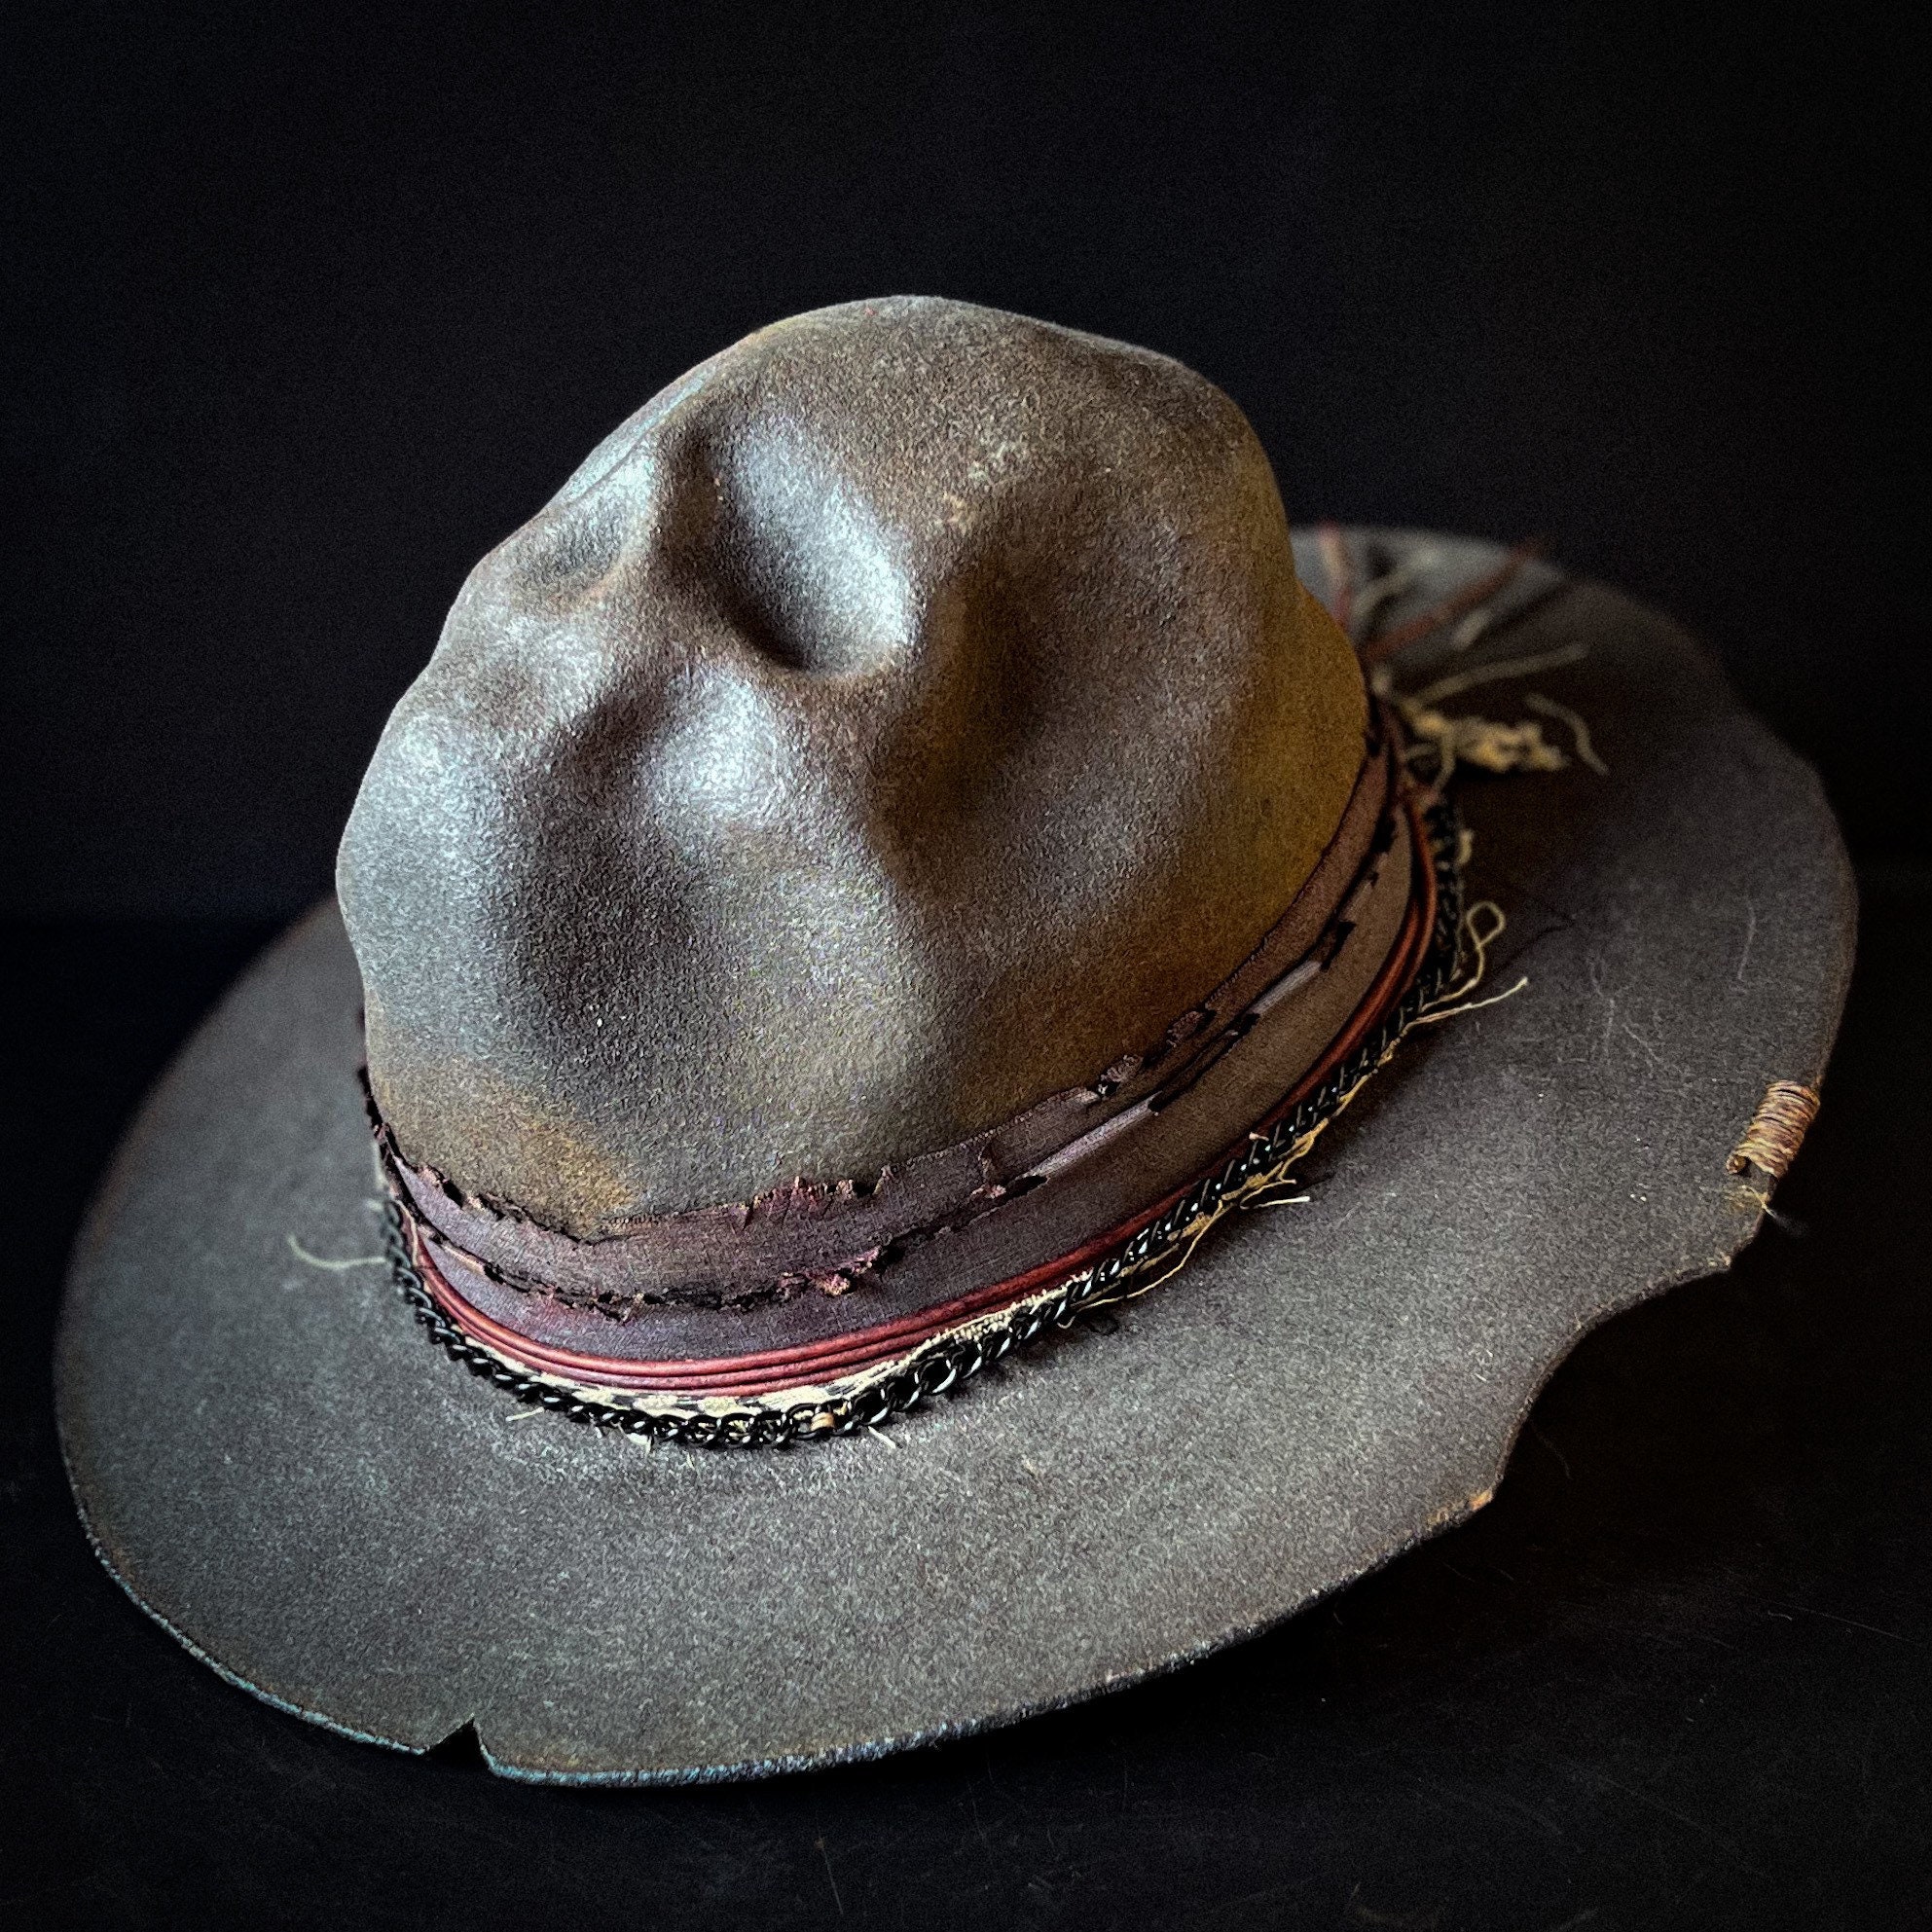 Cowboy Hat size 7 5/8. “Death Rides a Horse” from Ugly Outlaw.